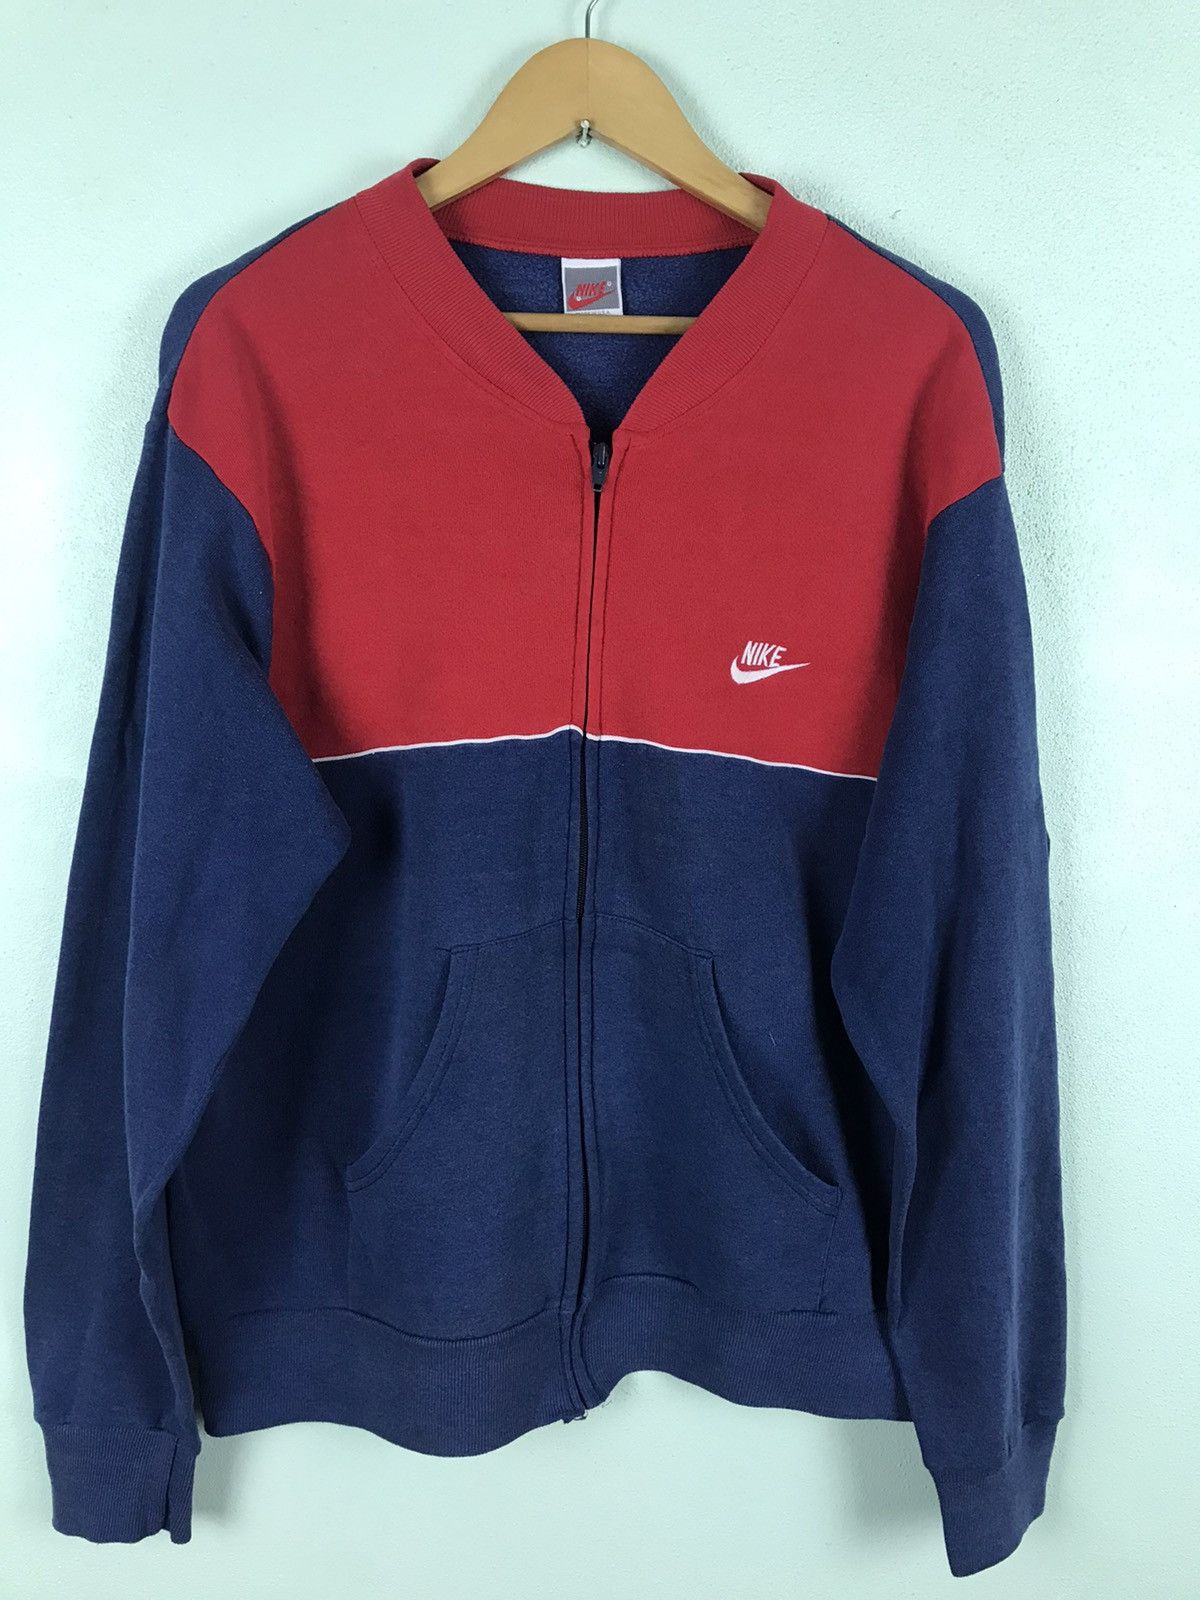 LAST DROP!! Vintage 90's Nike Made in USA - GH1019 - 1